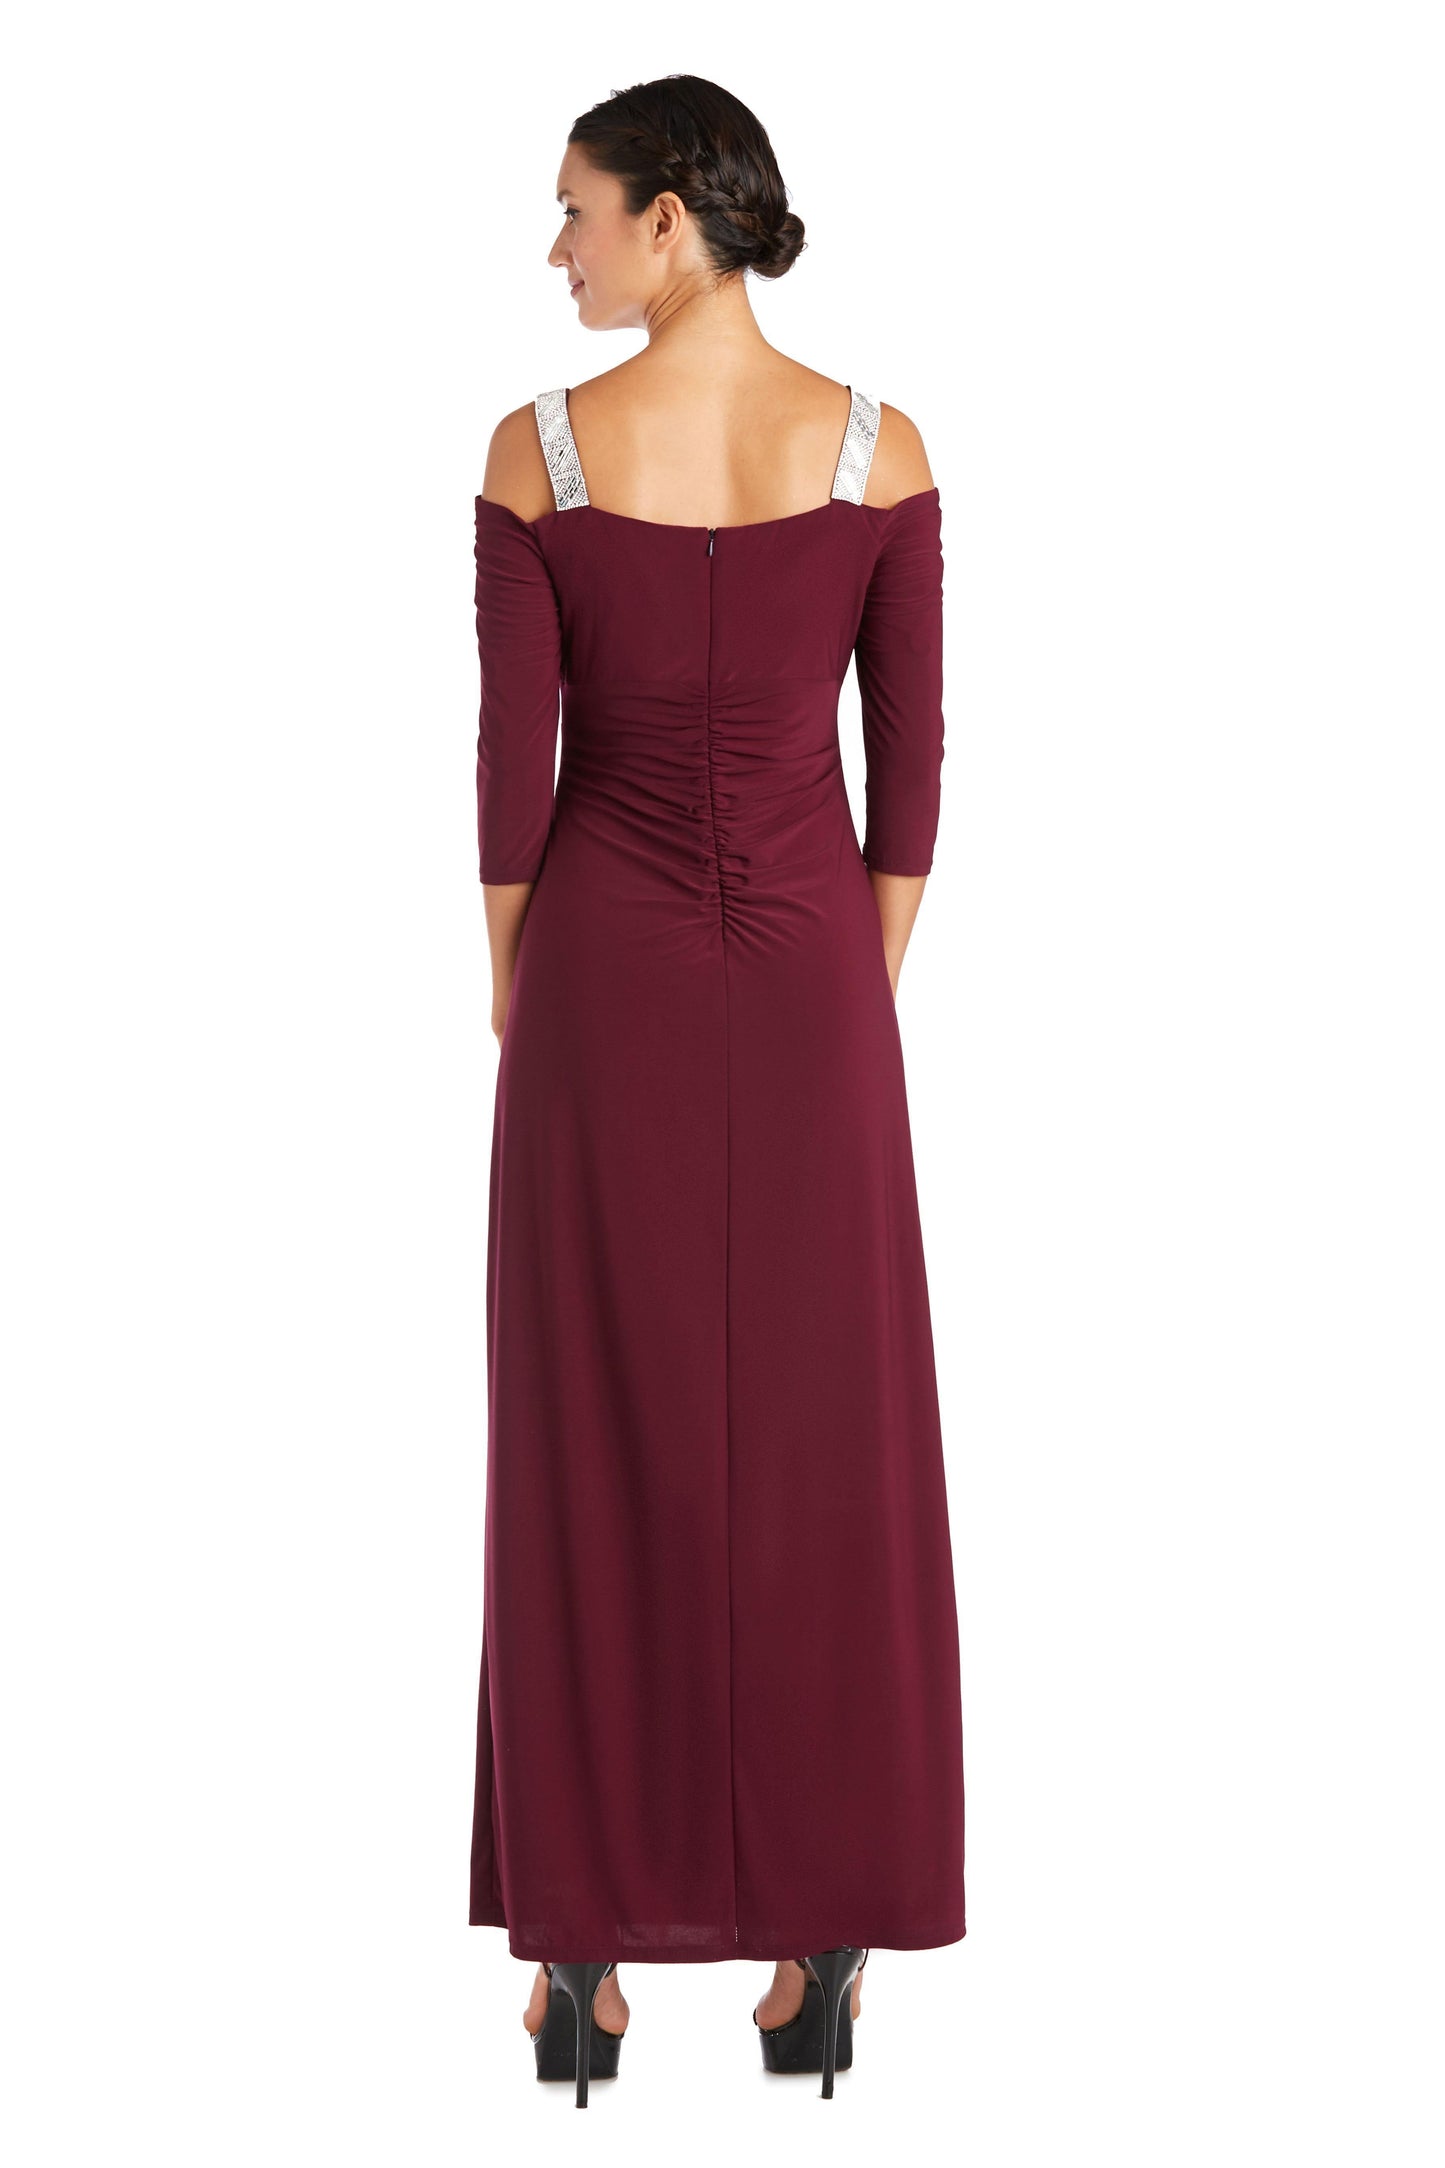 Long Formal Mother of the Bride Dress Sale - The Dress Outlet